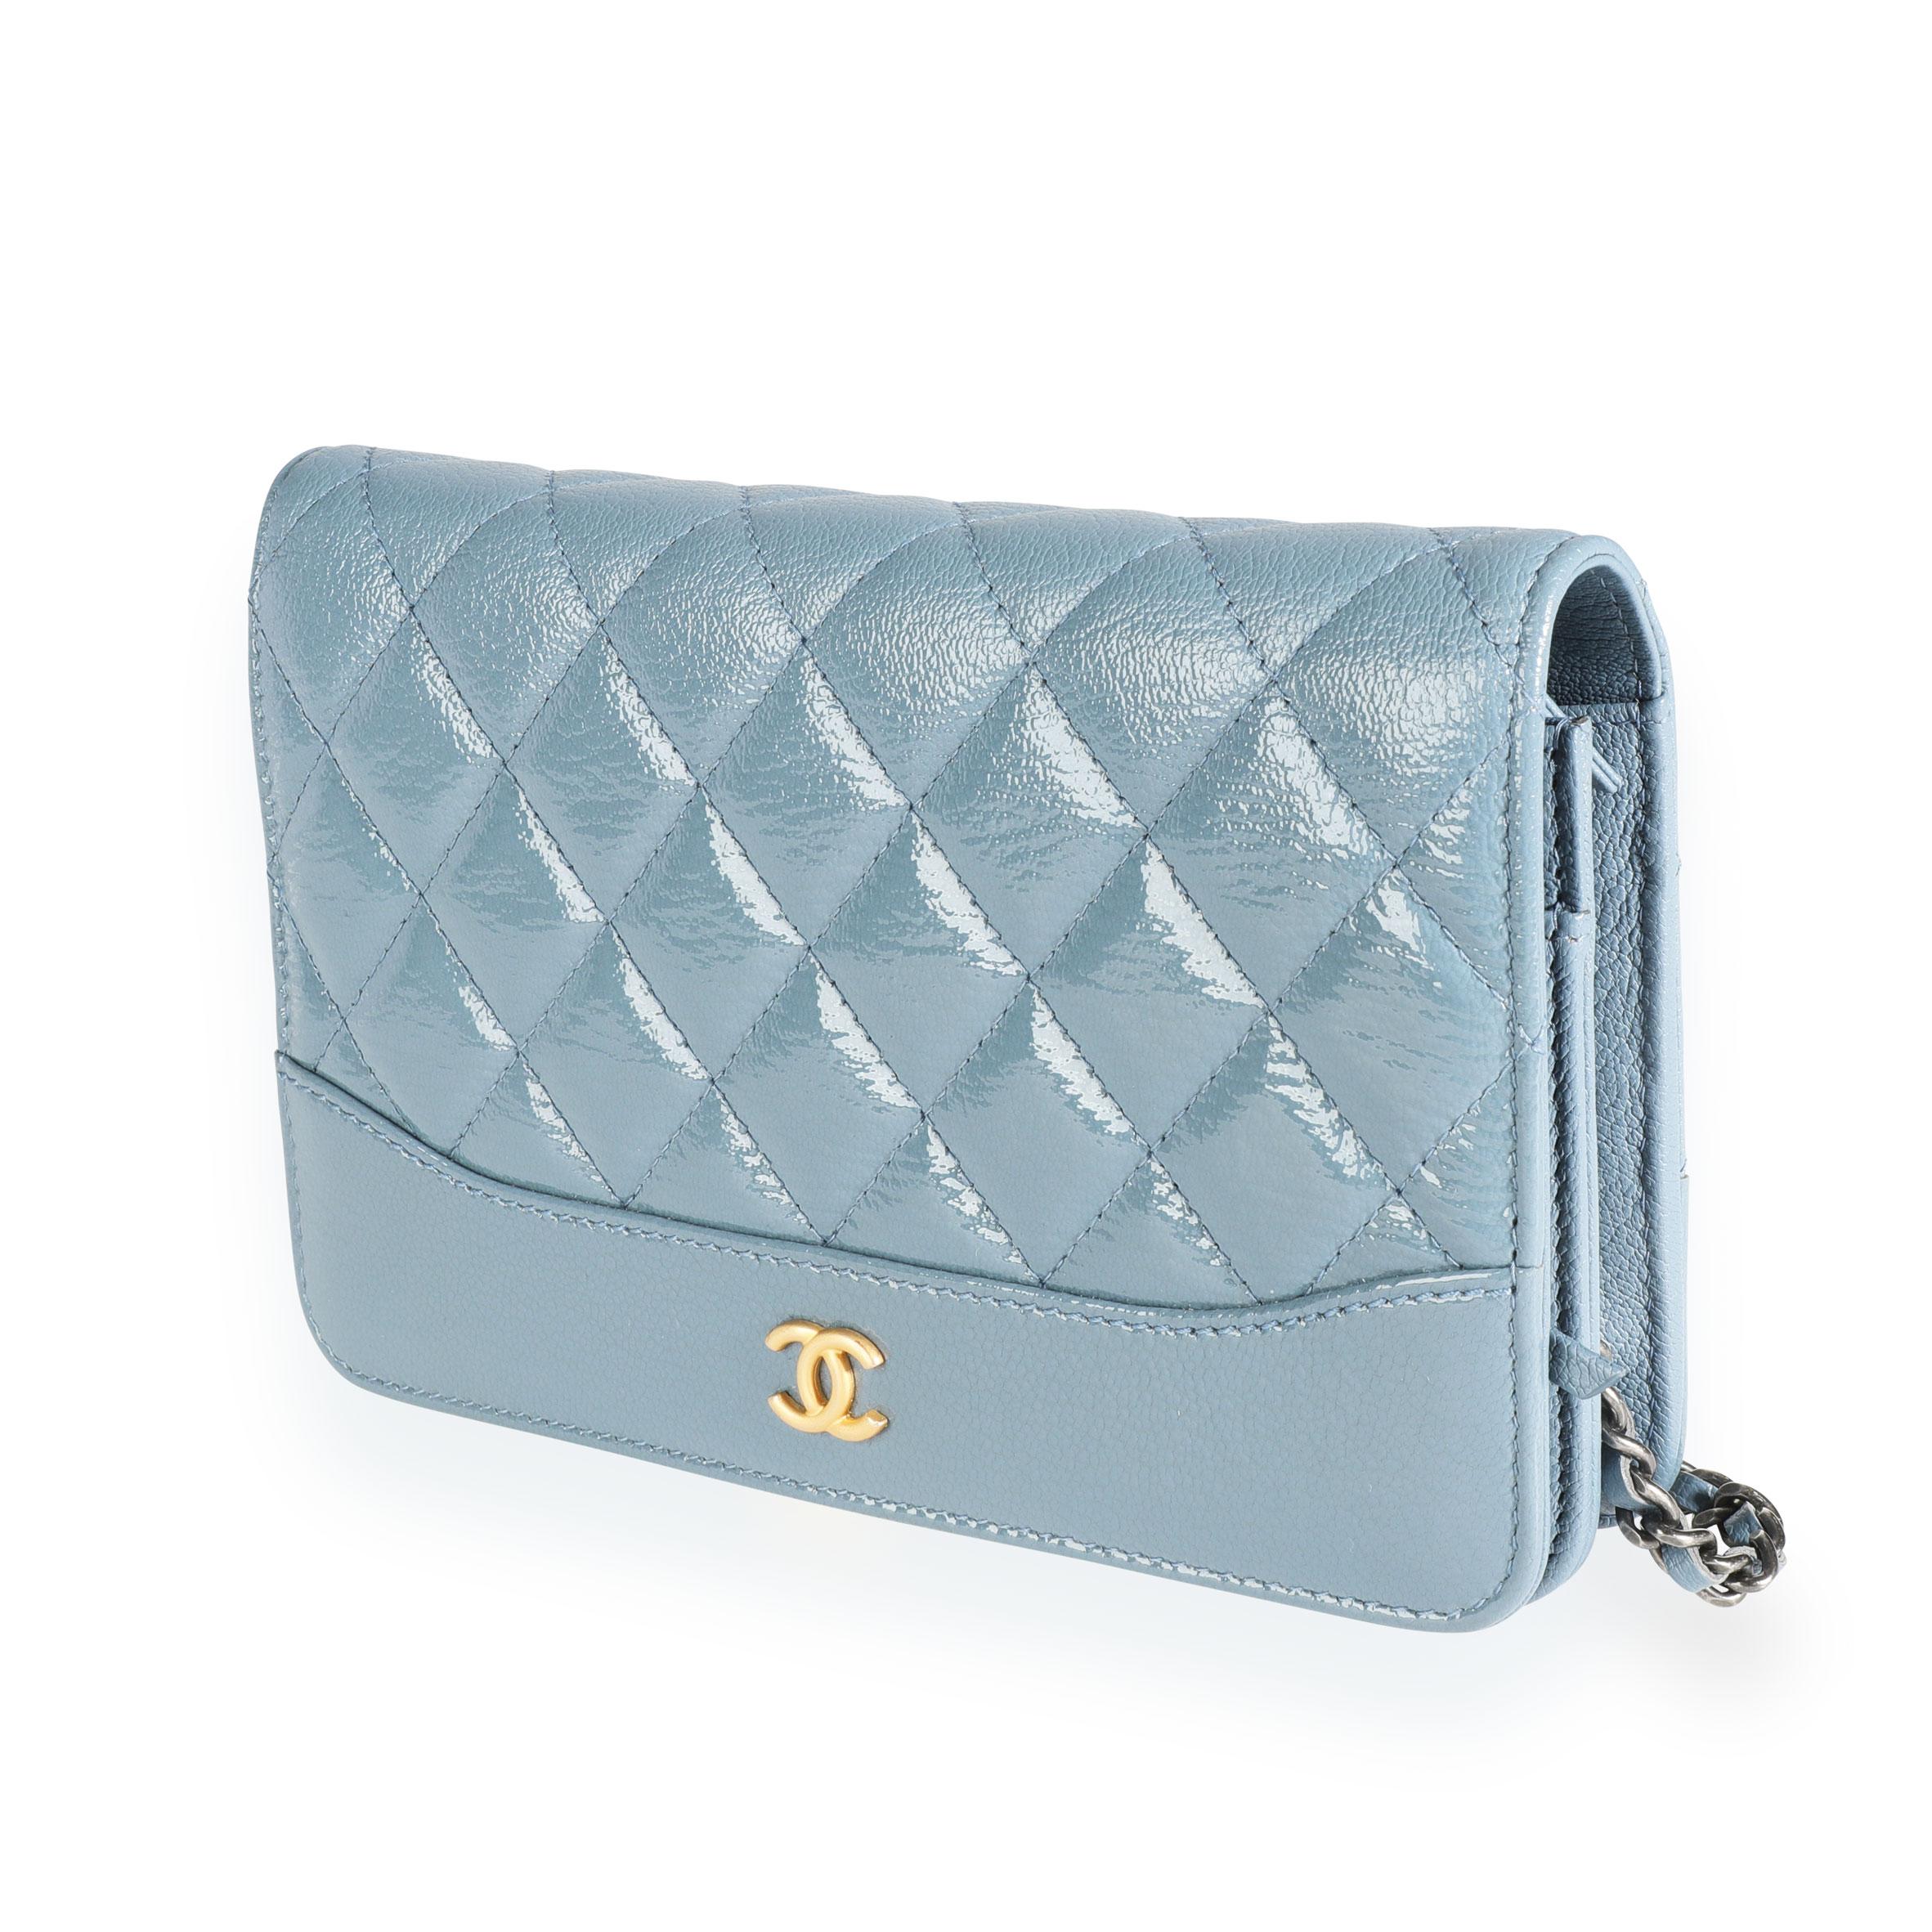  Chanel Blue Quilted Ombré Patent & Aged Calfskin Gabrielle Wallet on Chain
SKU: 112332
MSRP: USD 2,700.00
Condition: Pre-owned (3000)
Condition Description: 
Handbag Condition: Excellent
Condition Comments: Excellent Condition. Some imprinting to